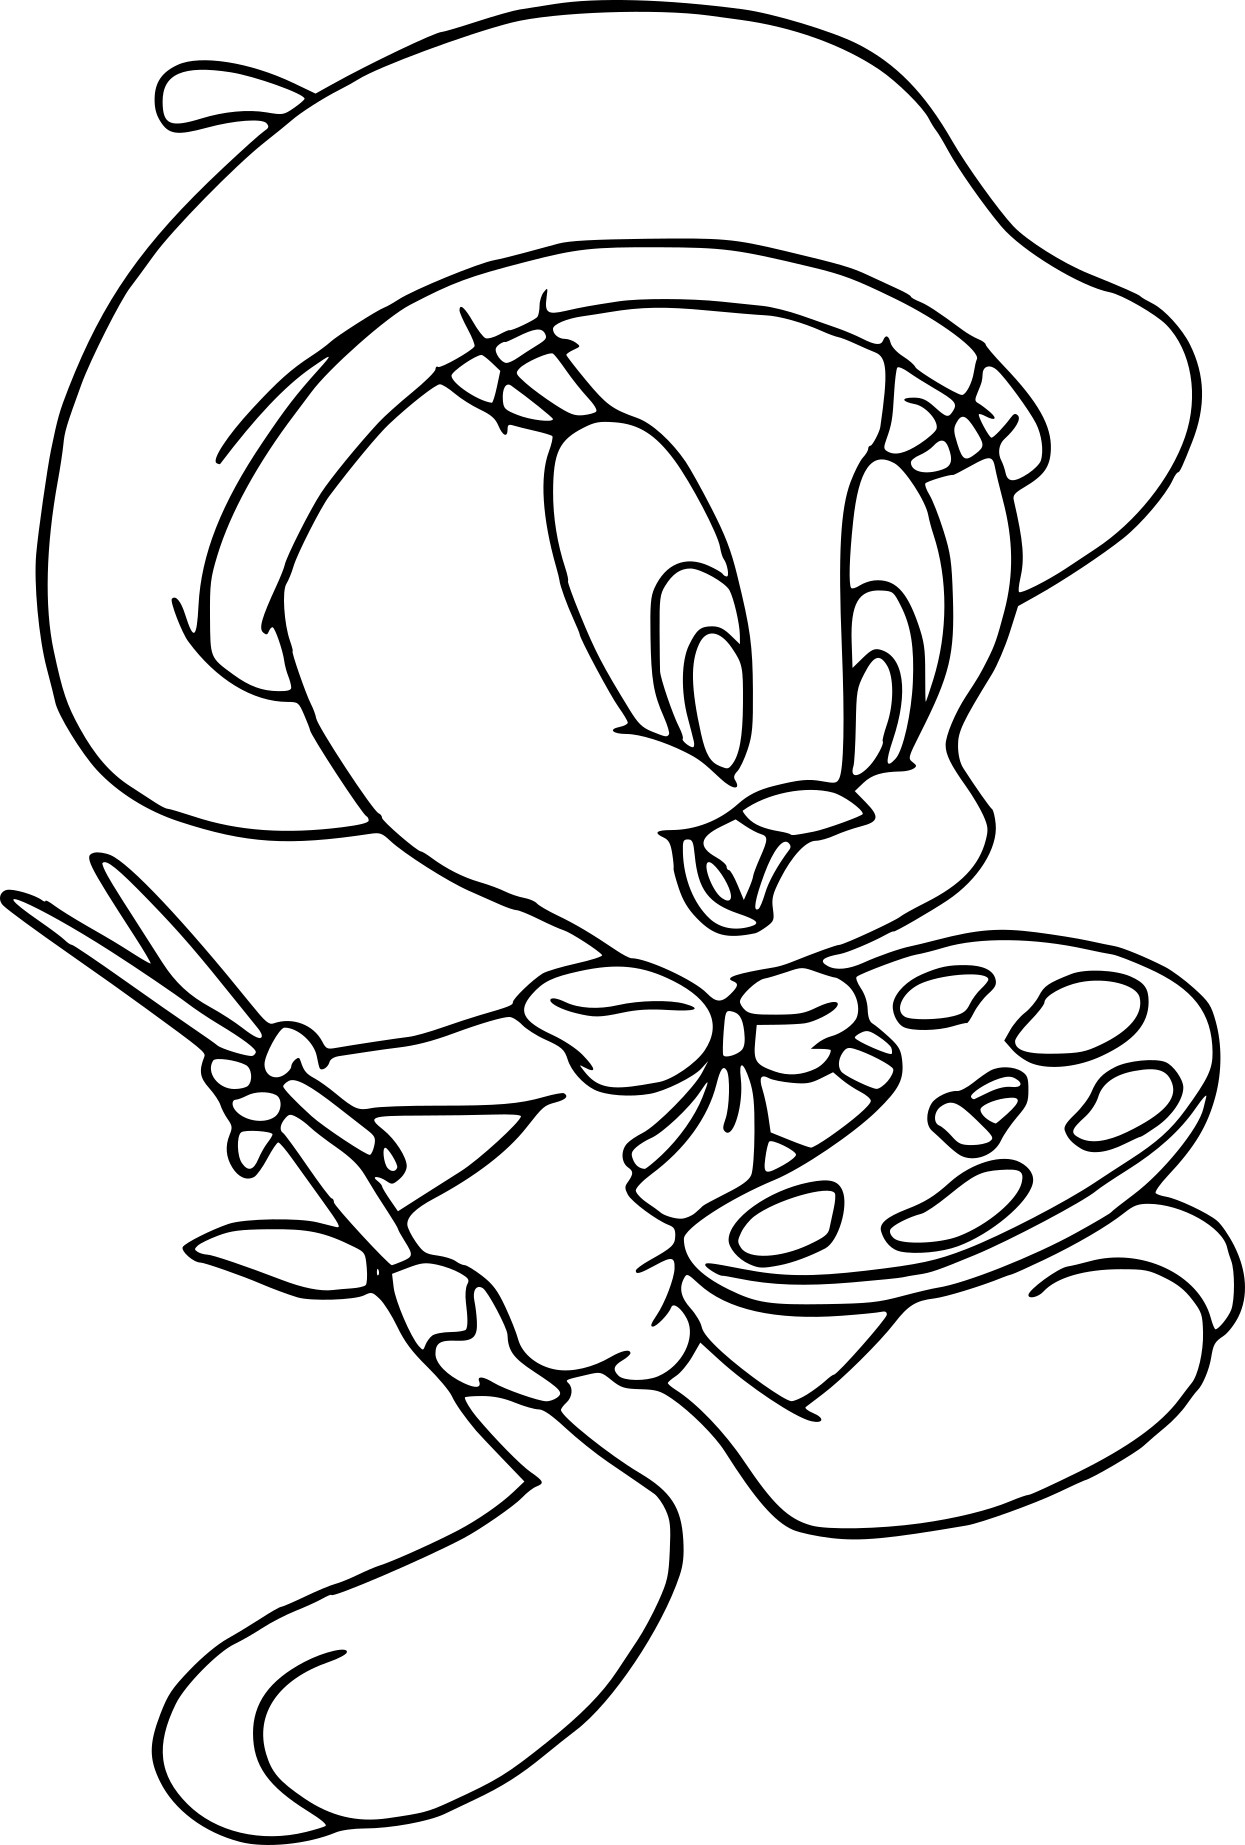 Titi The Painter coloring page